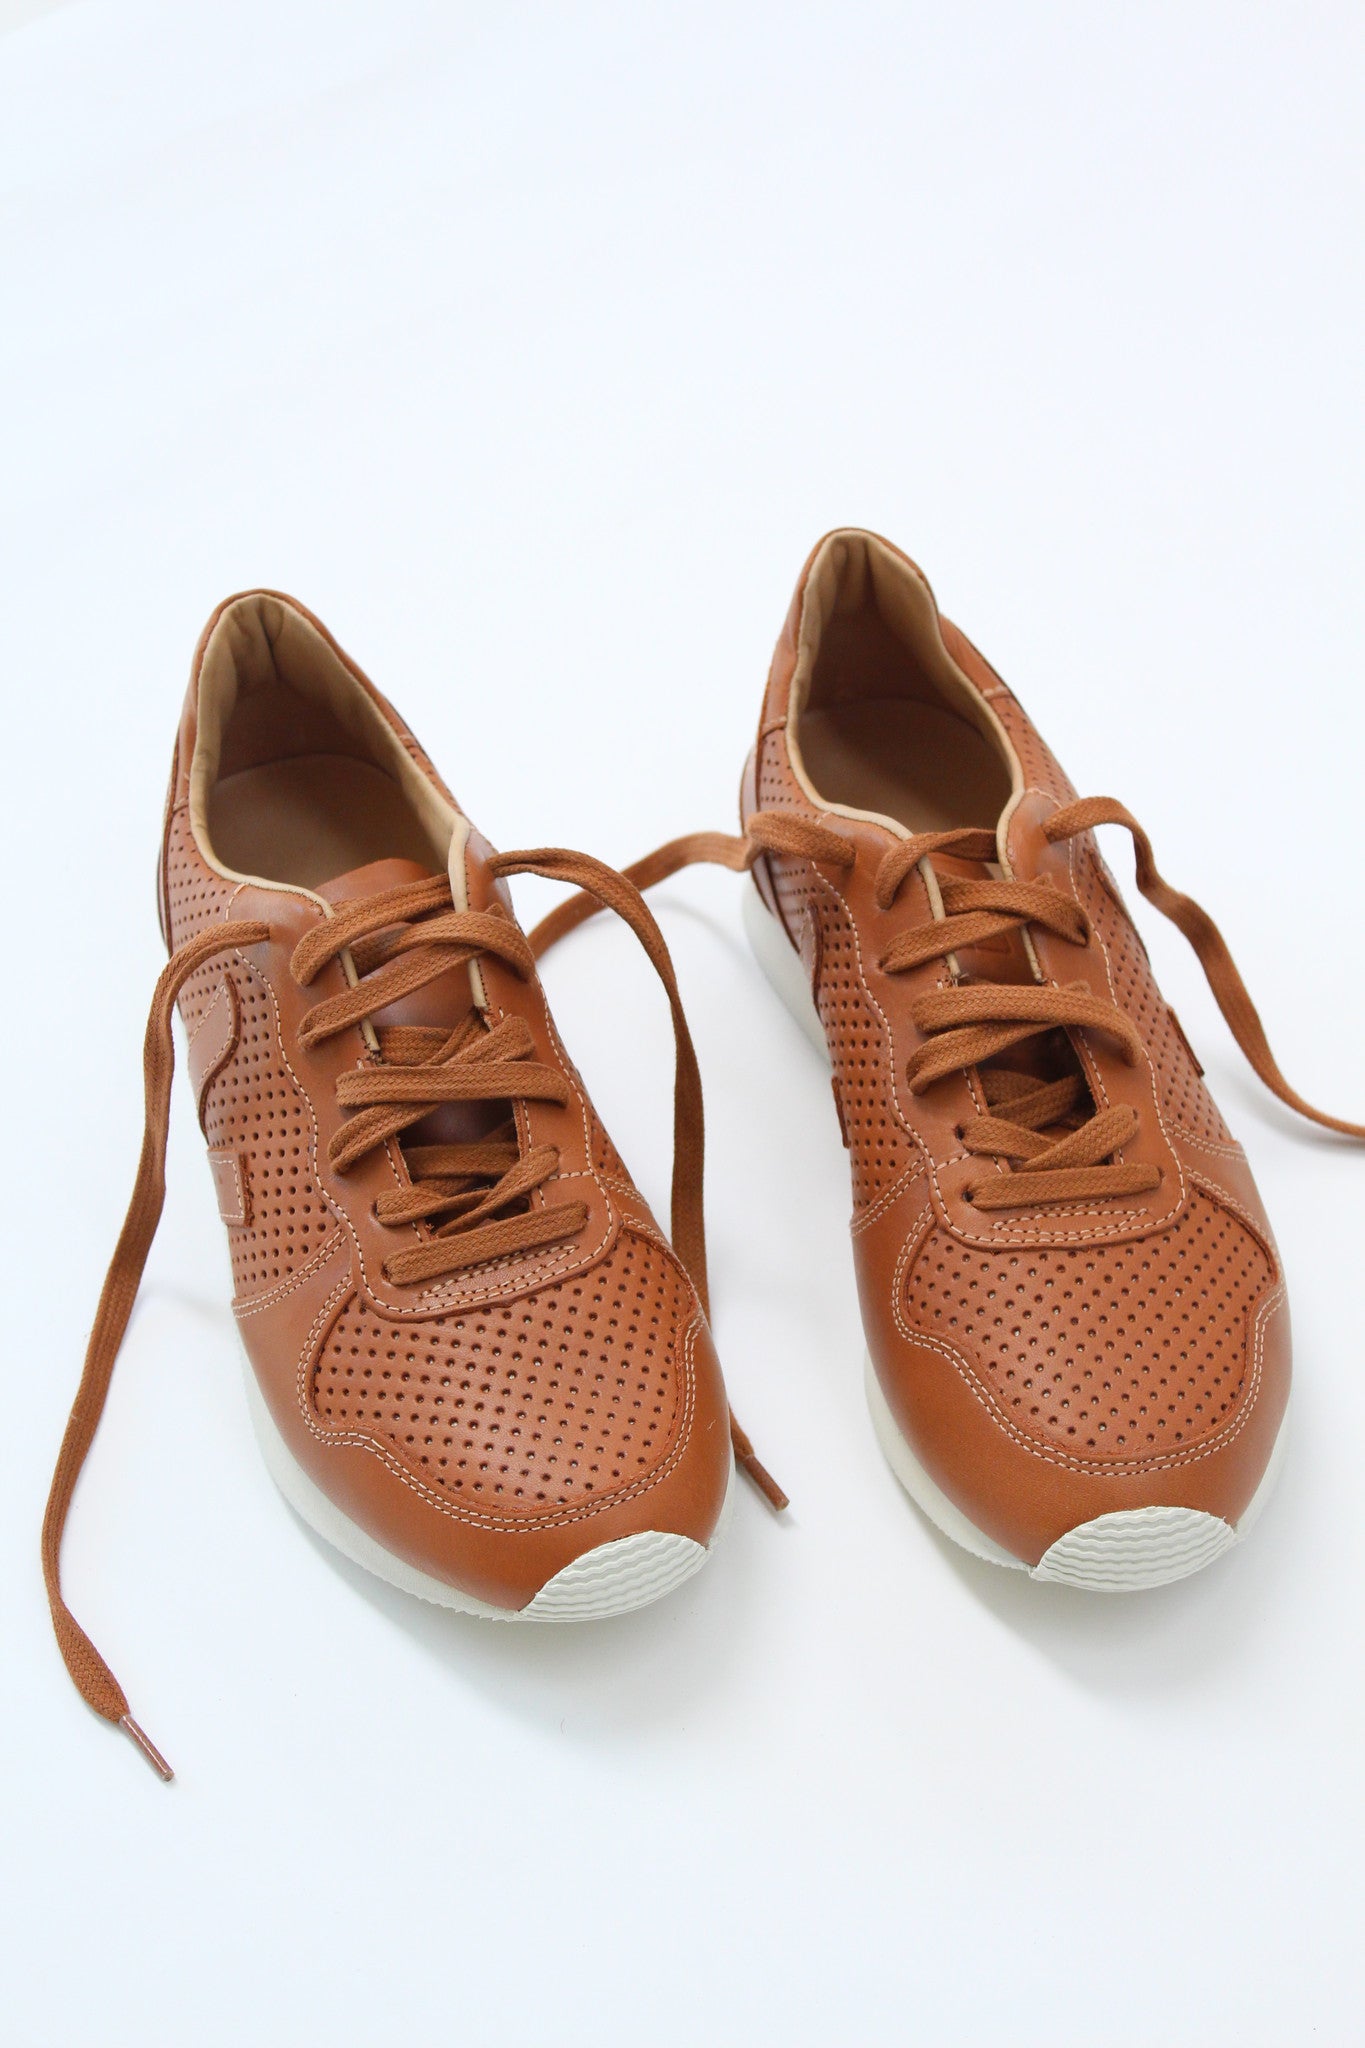 Beklina Veja Holiday Low Top Leather Tuile  Perforated Sneaker